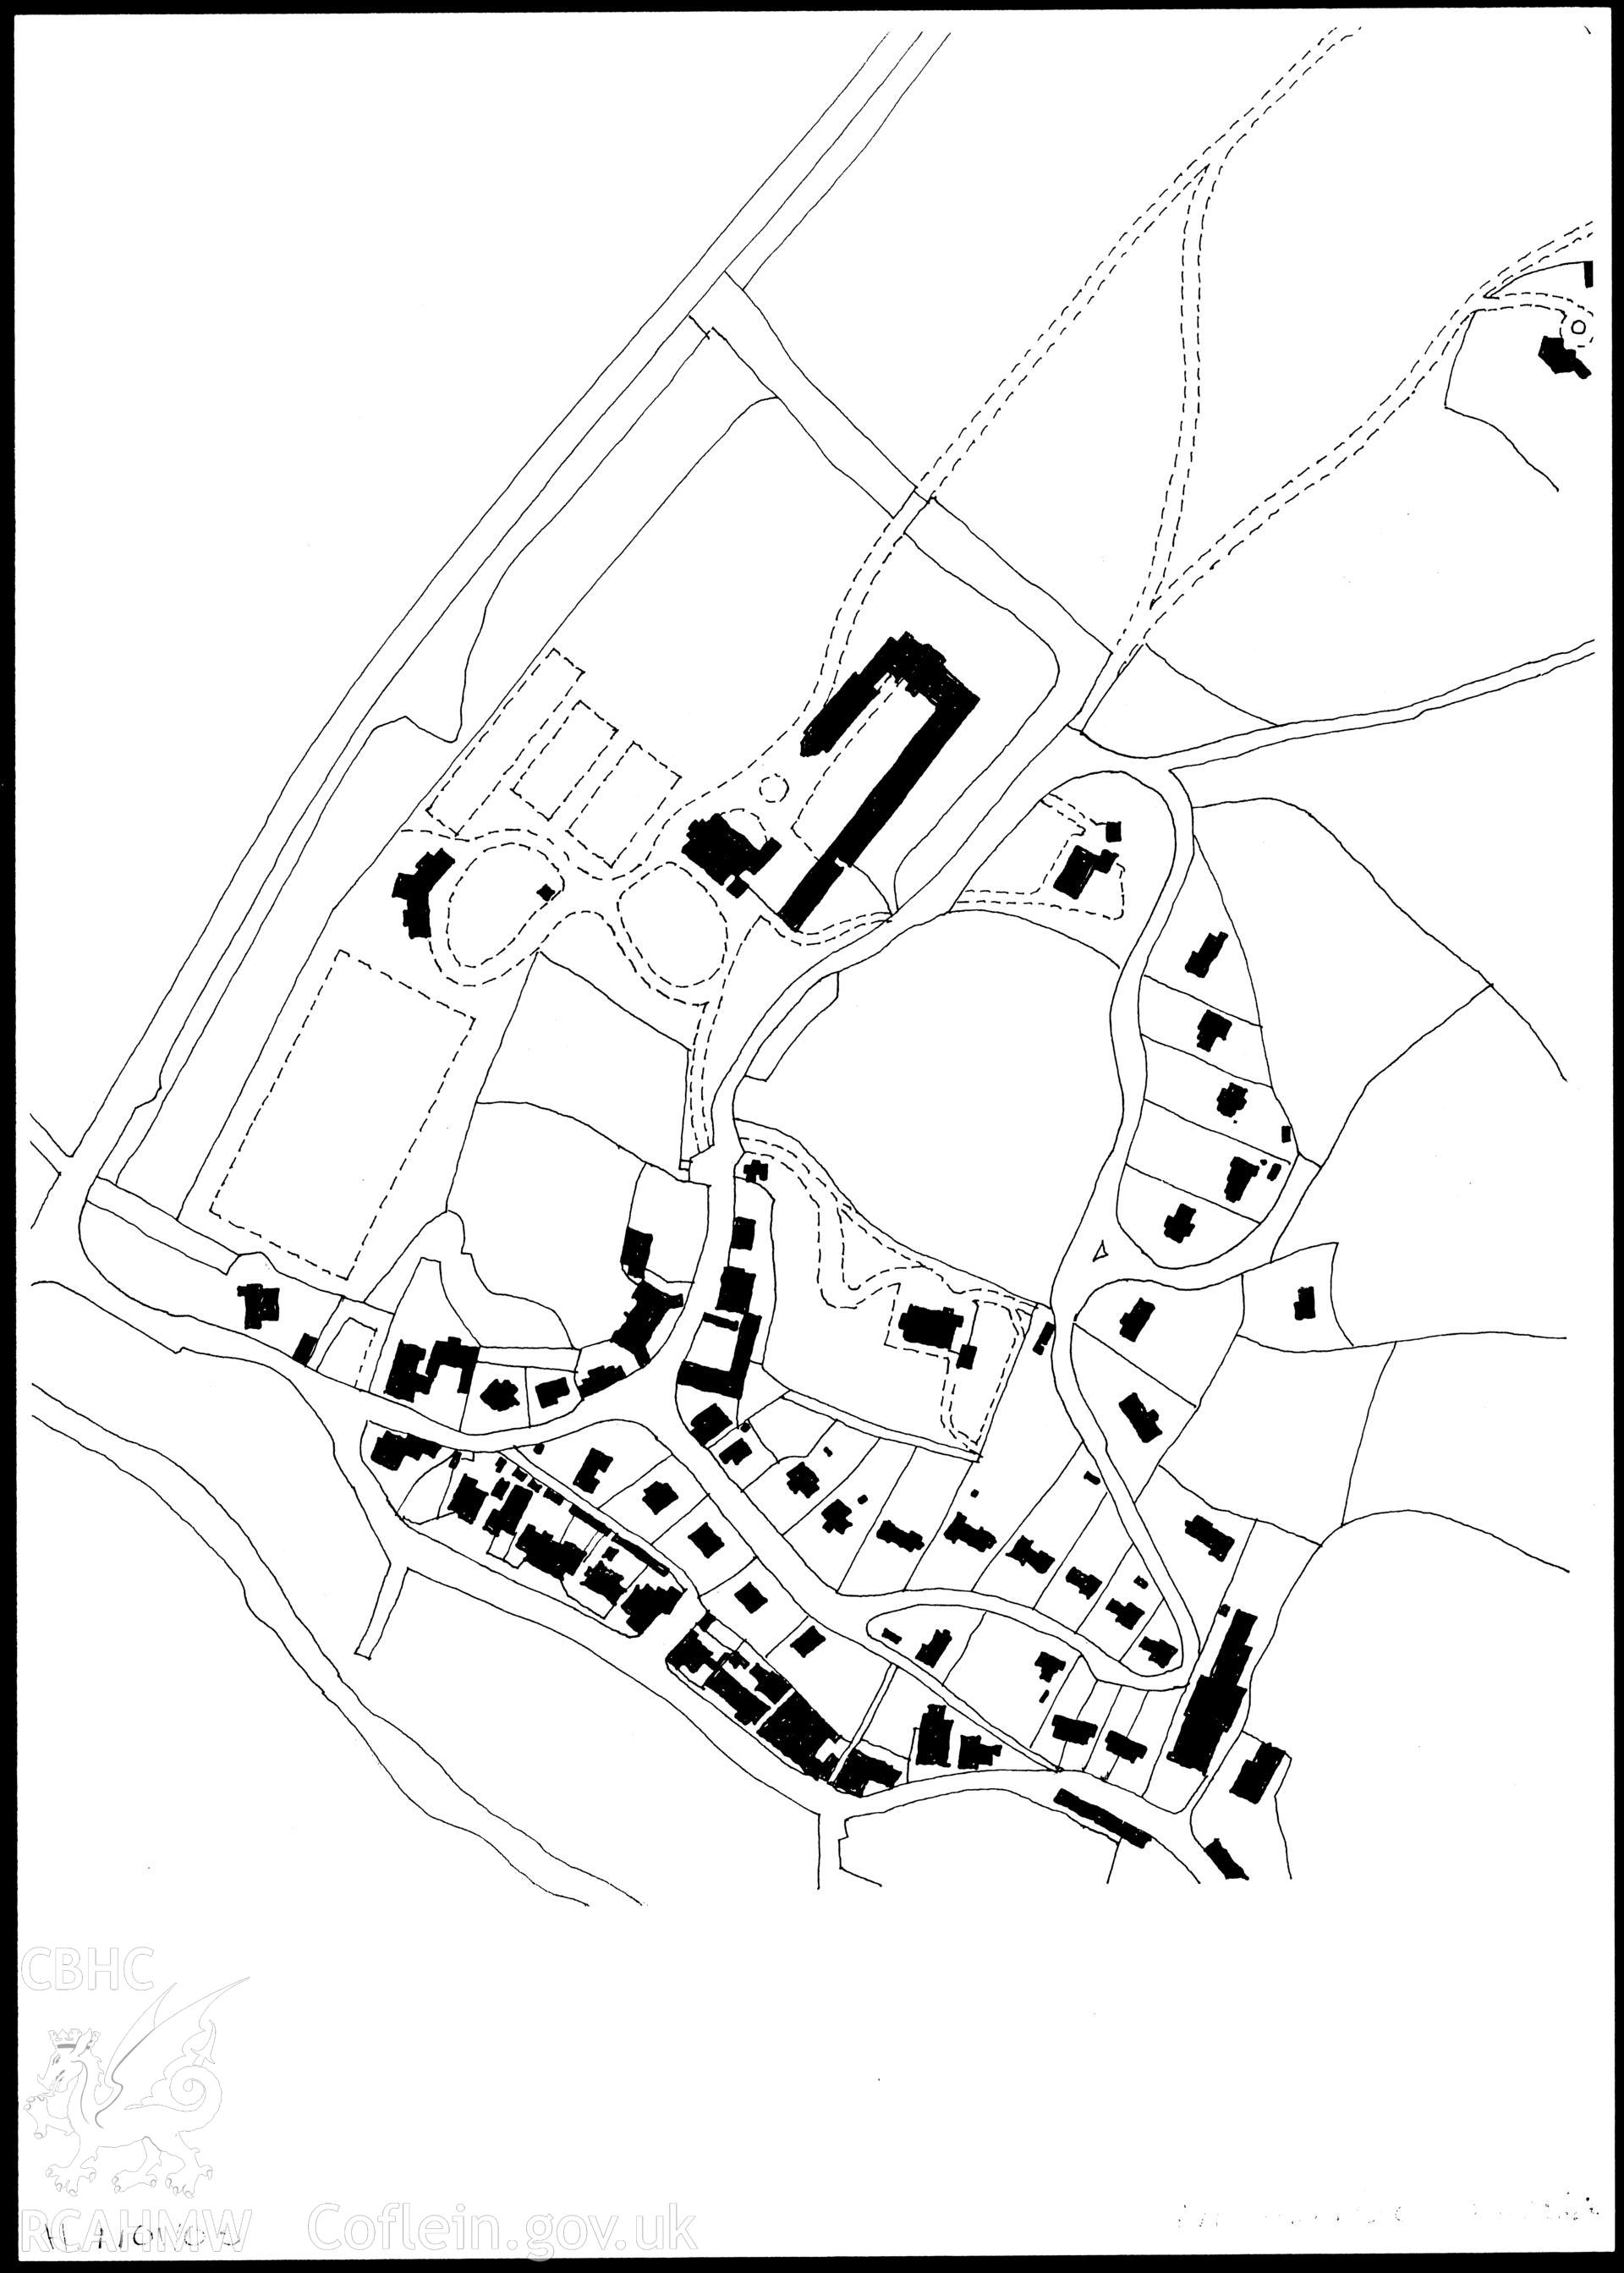 Annotated plan of the village of Llanfairfechan showing the houses built by H.L. North, produced by Adam Voelcker, 2009. 'Herbert Luck North. Arts and Crafts Architecture for Wales', page 52.